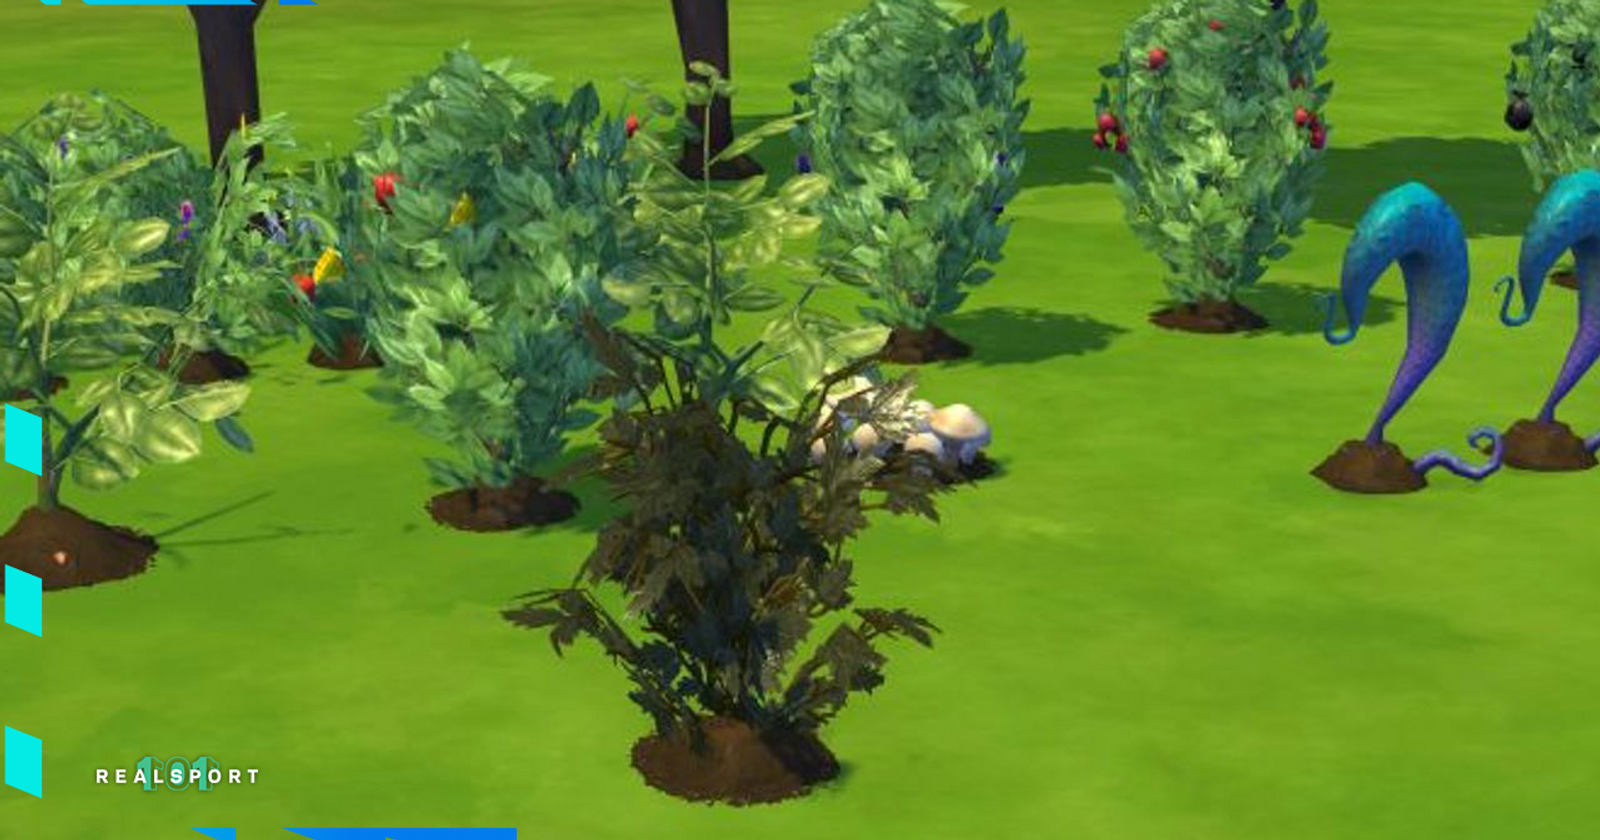 The Sims 4 Death Flower Cheat Code: How to Access It